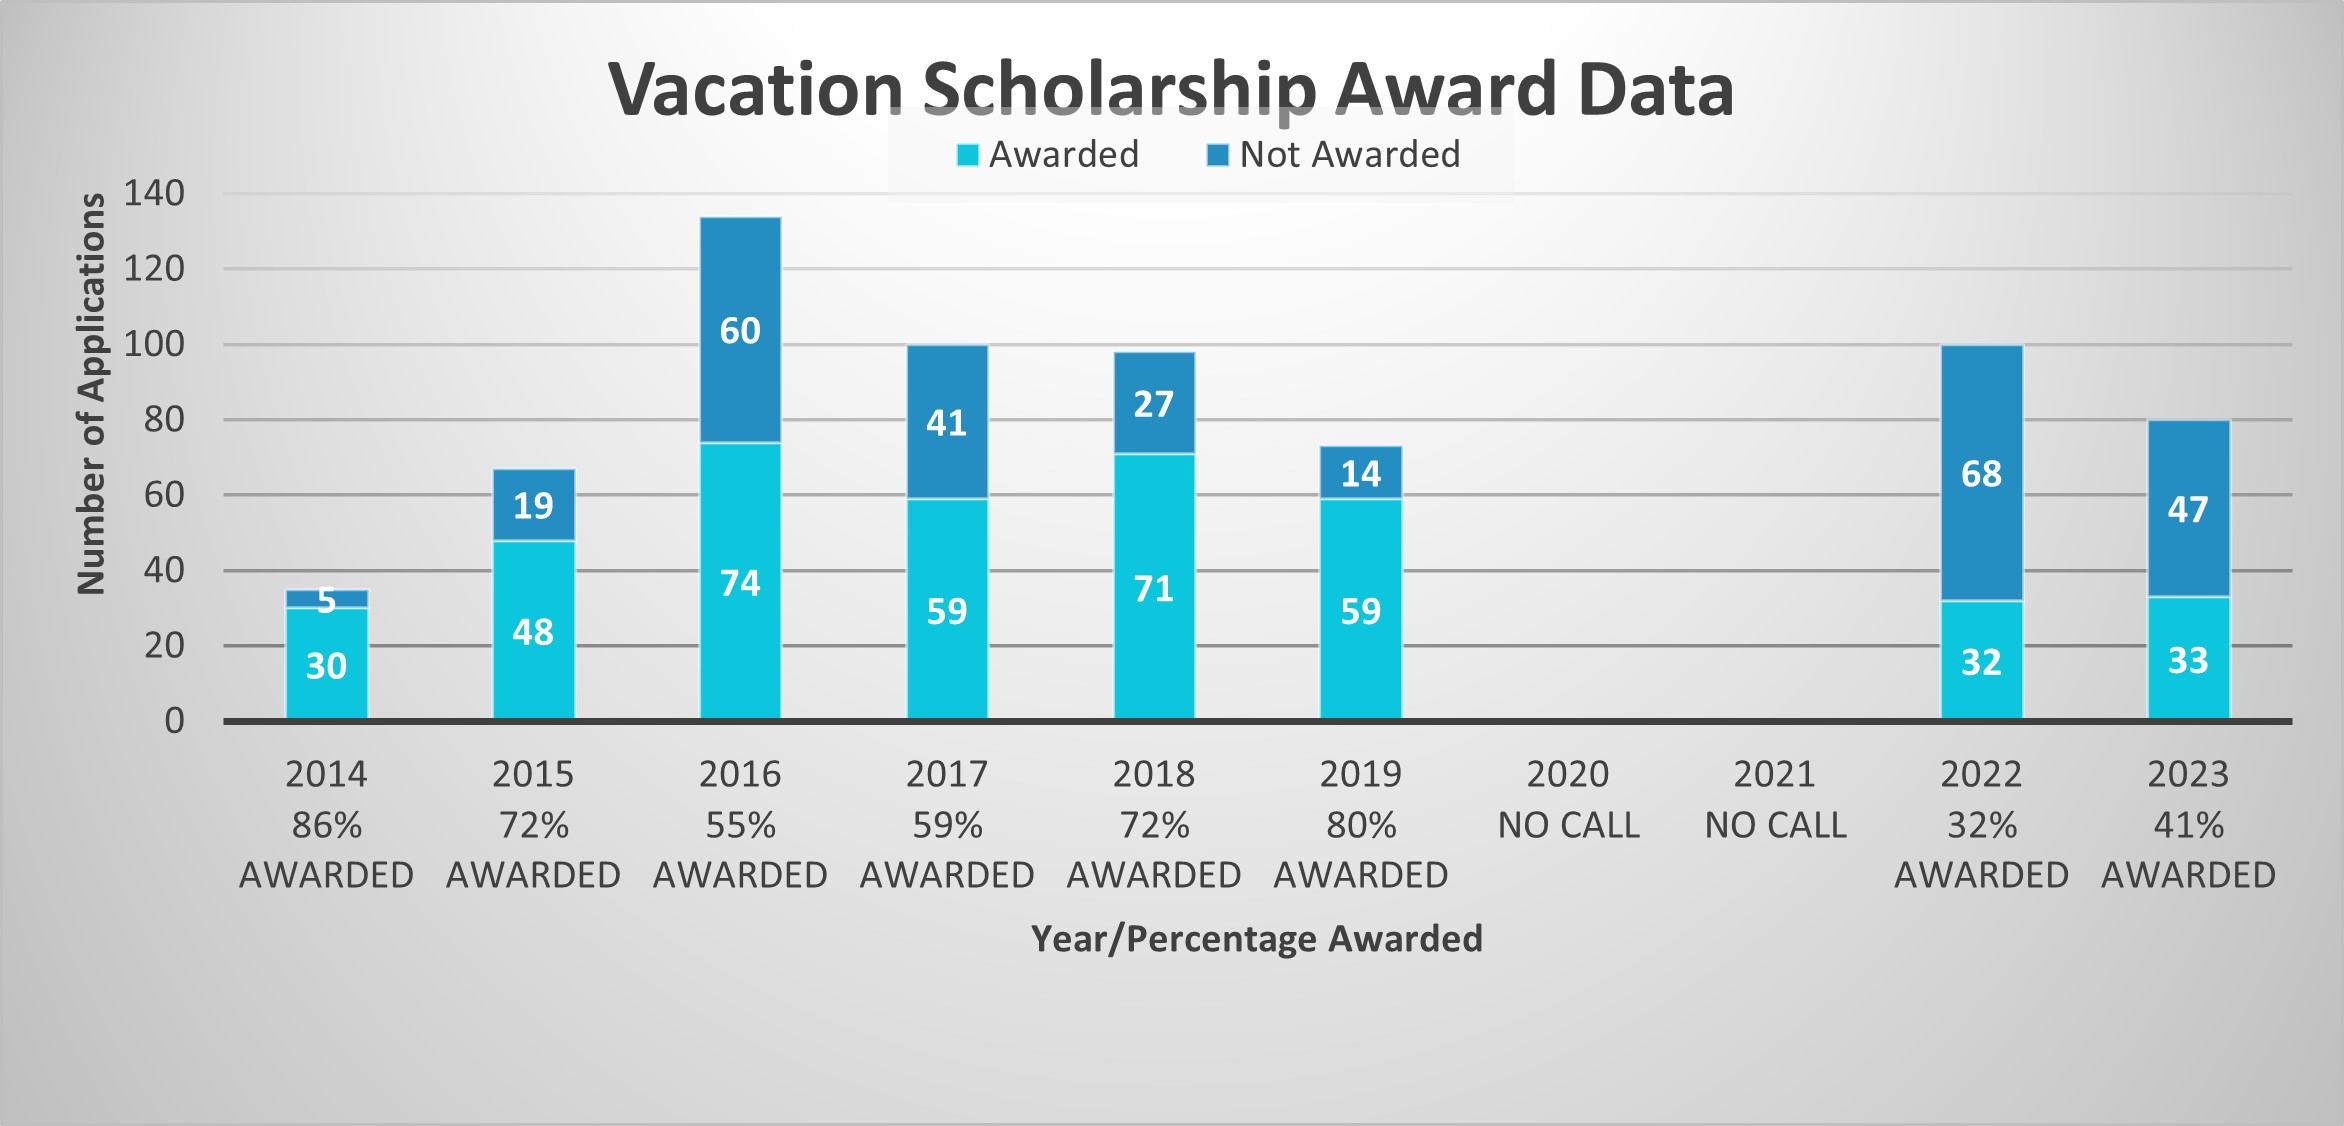 Chart showing how the application and award rates varied from 2014 to 2023